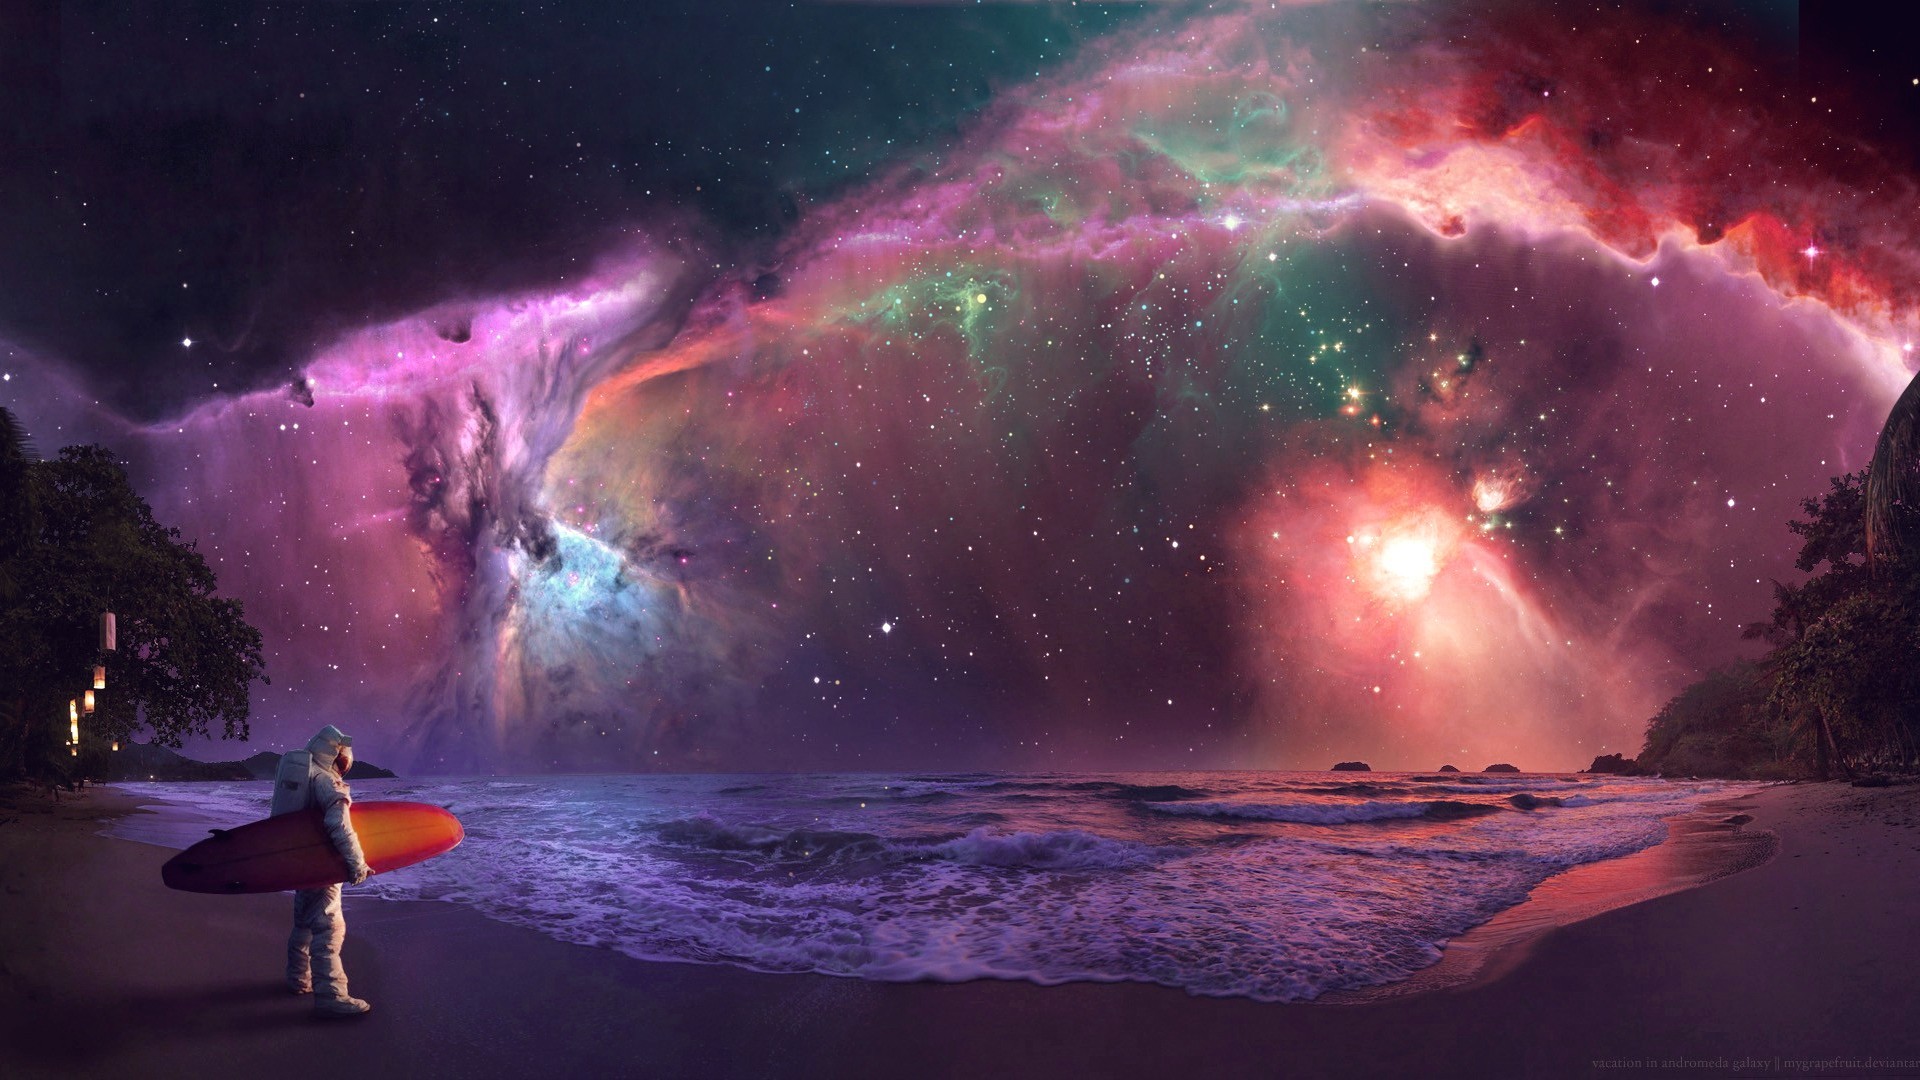 General 1920x1080 space astronaut surfers abstract surfing stars nebula science fiction photo manipulation digital art space art artwork beach sea sky colorful